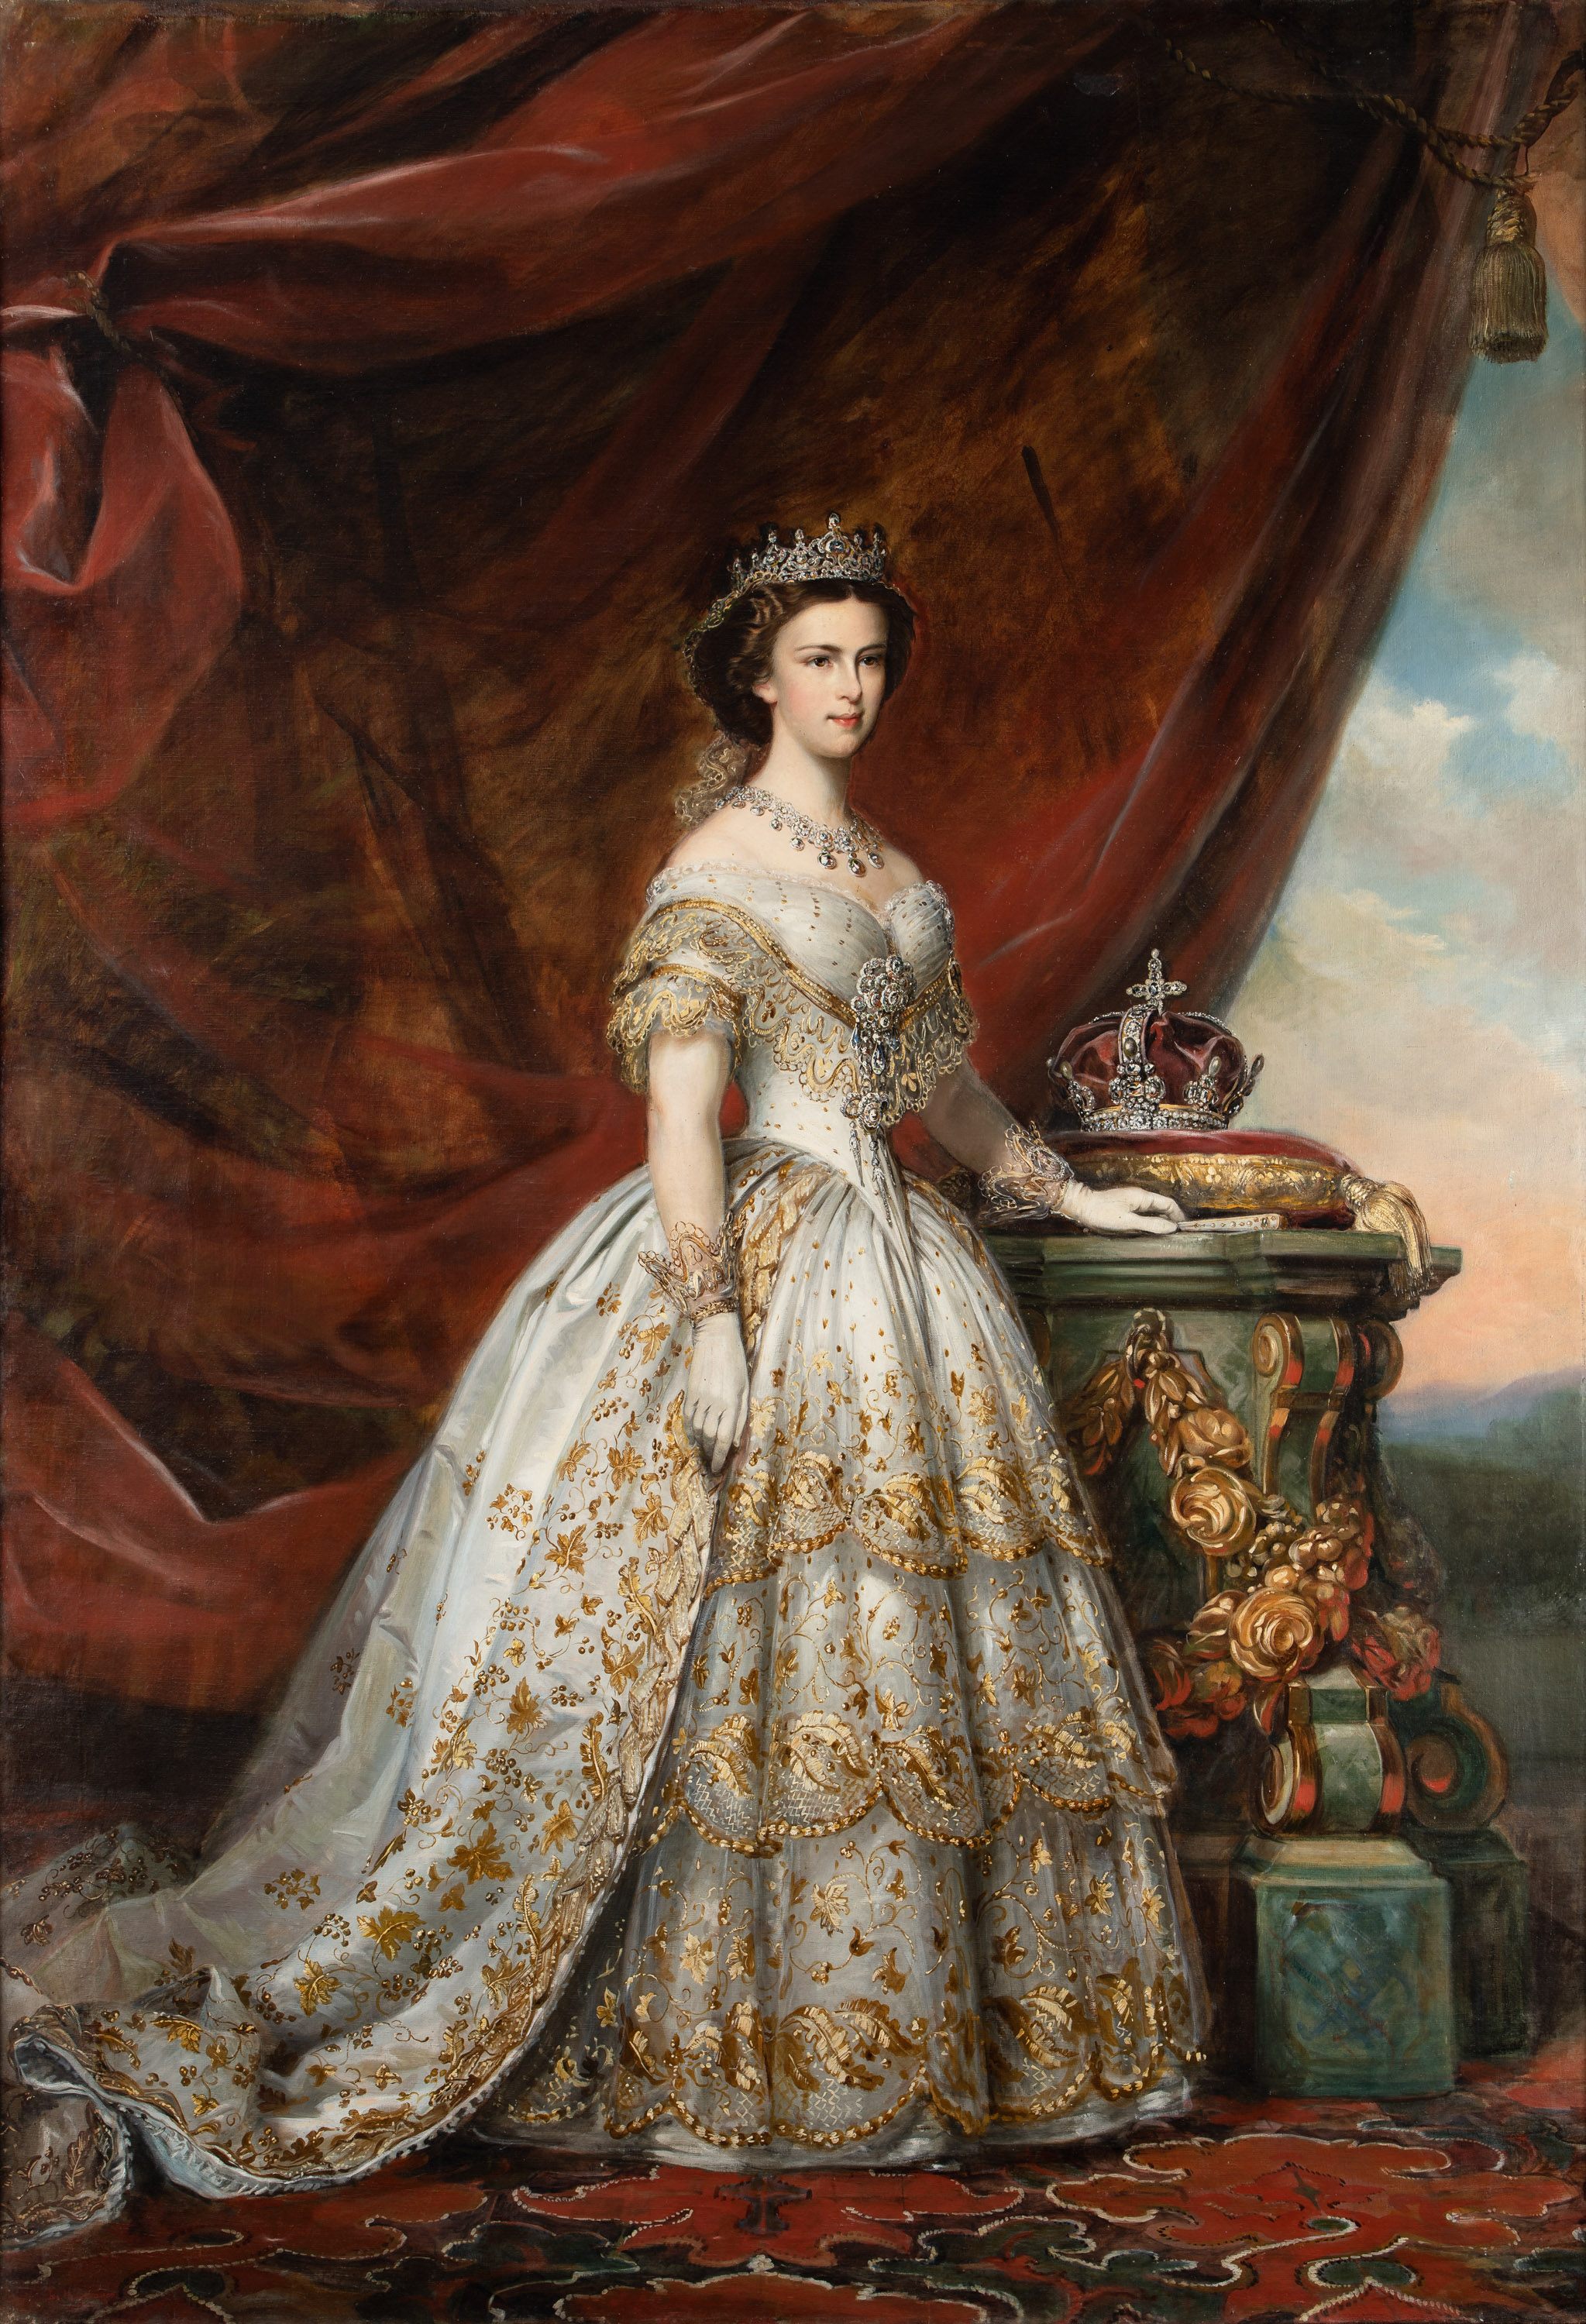 The Missing Wedding Dress of Empress Sisi - Atlas Obscura